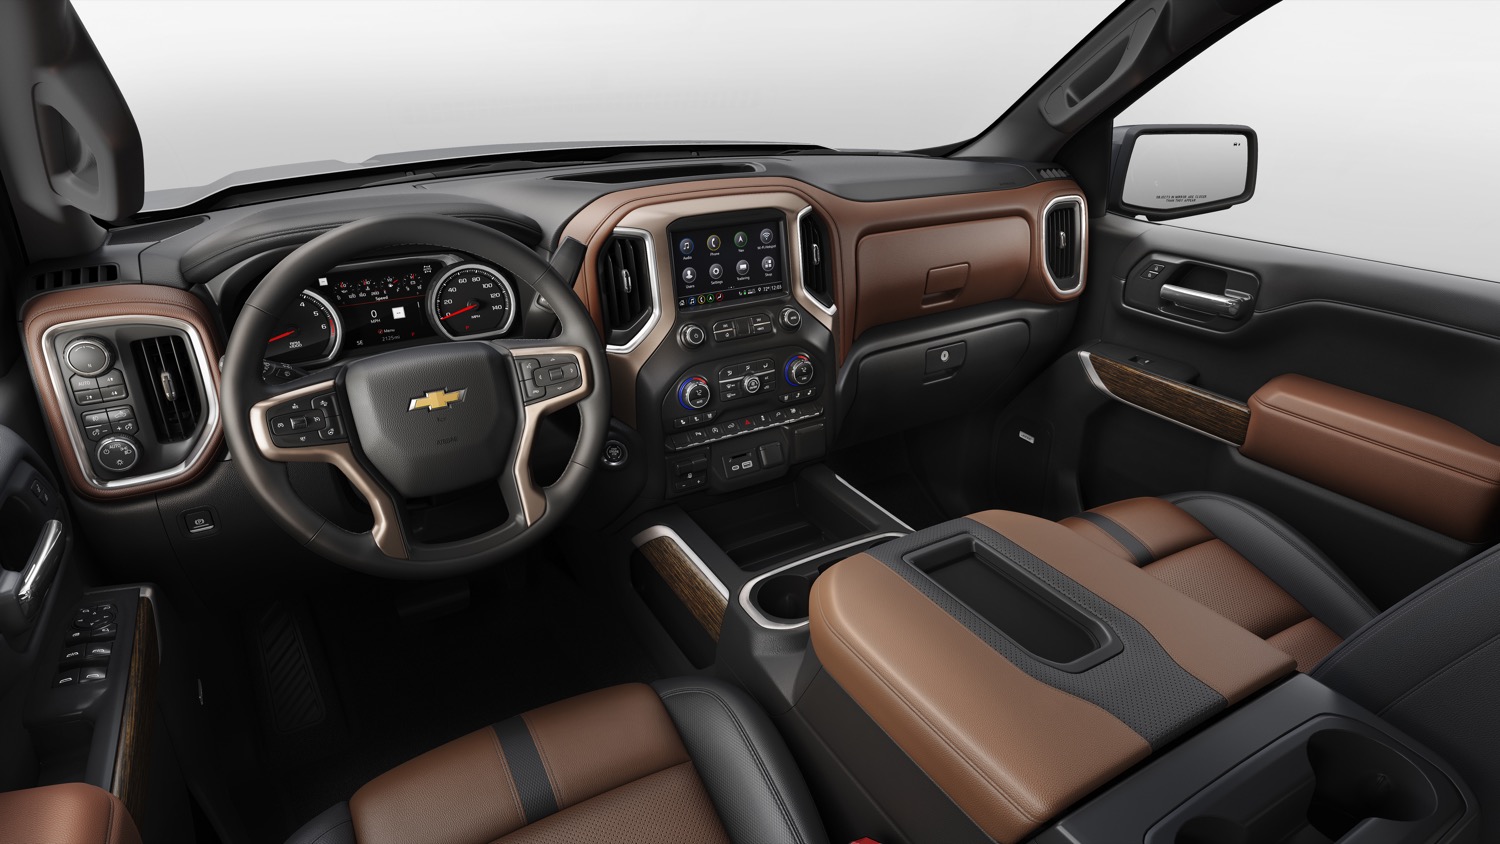 2019 Silverado Pictures Chevys New Truck In Detail Gm Authority